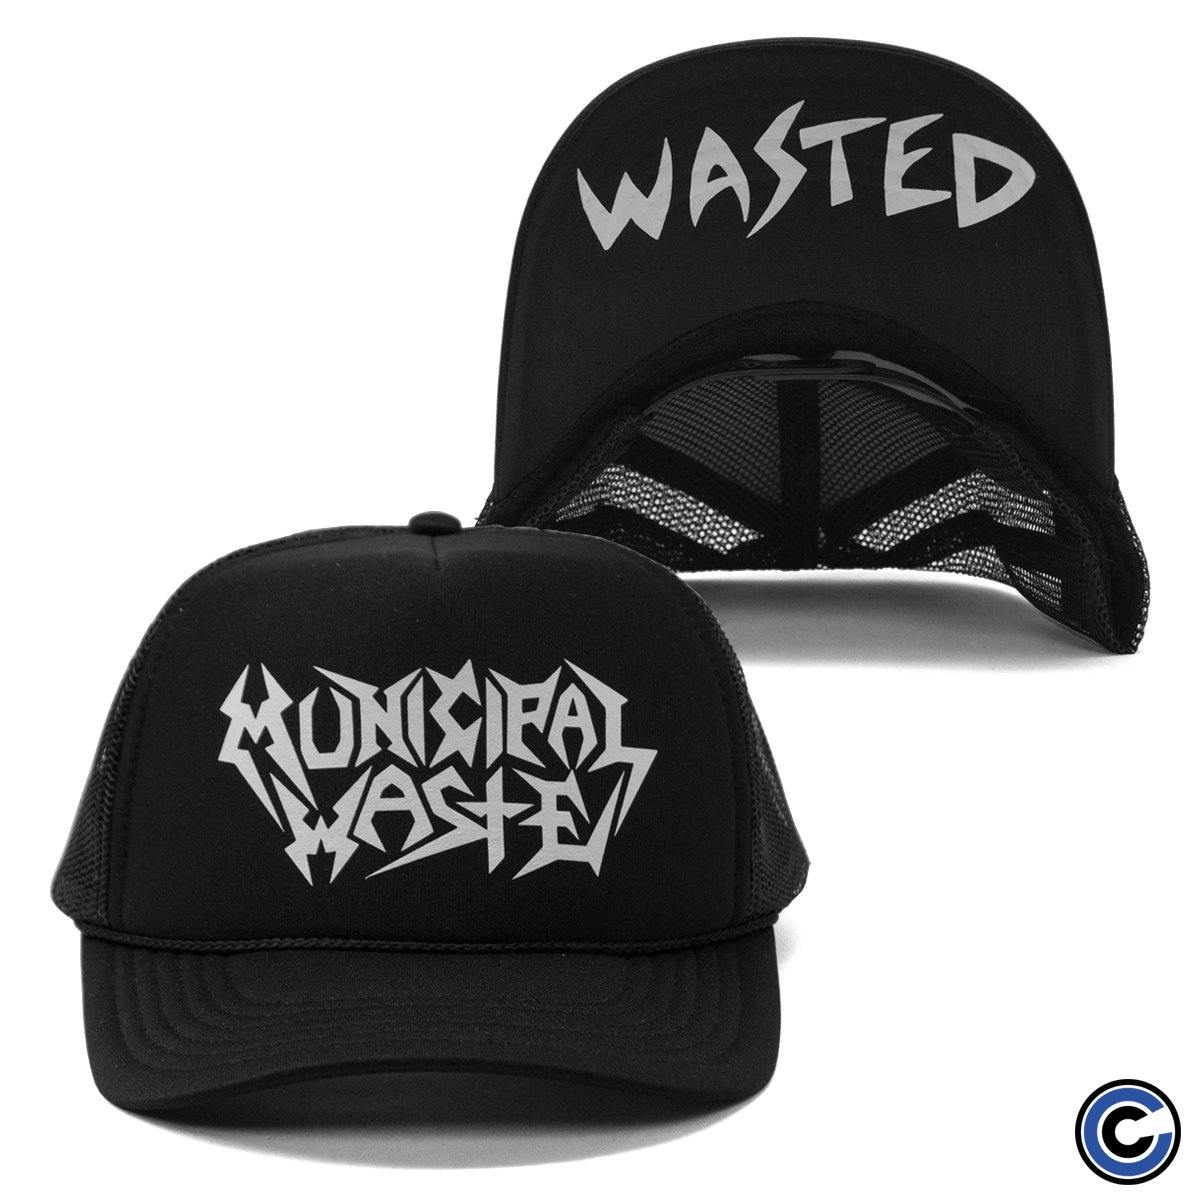 Buy – Municipal Waste "Wasted" Trucker Hat – Band & Music Merch – Cold Cuts Merch